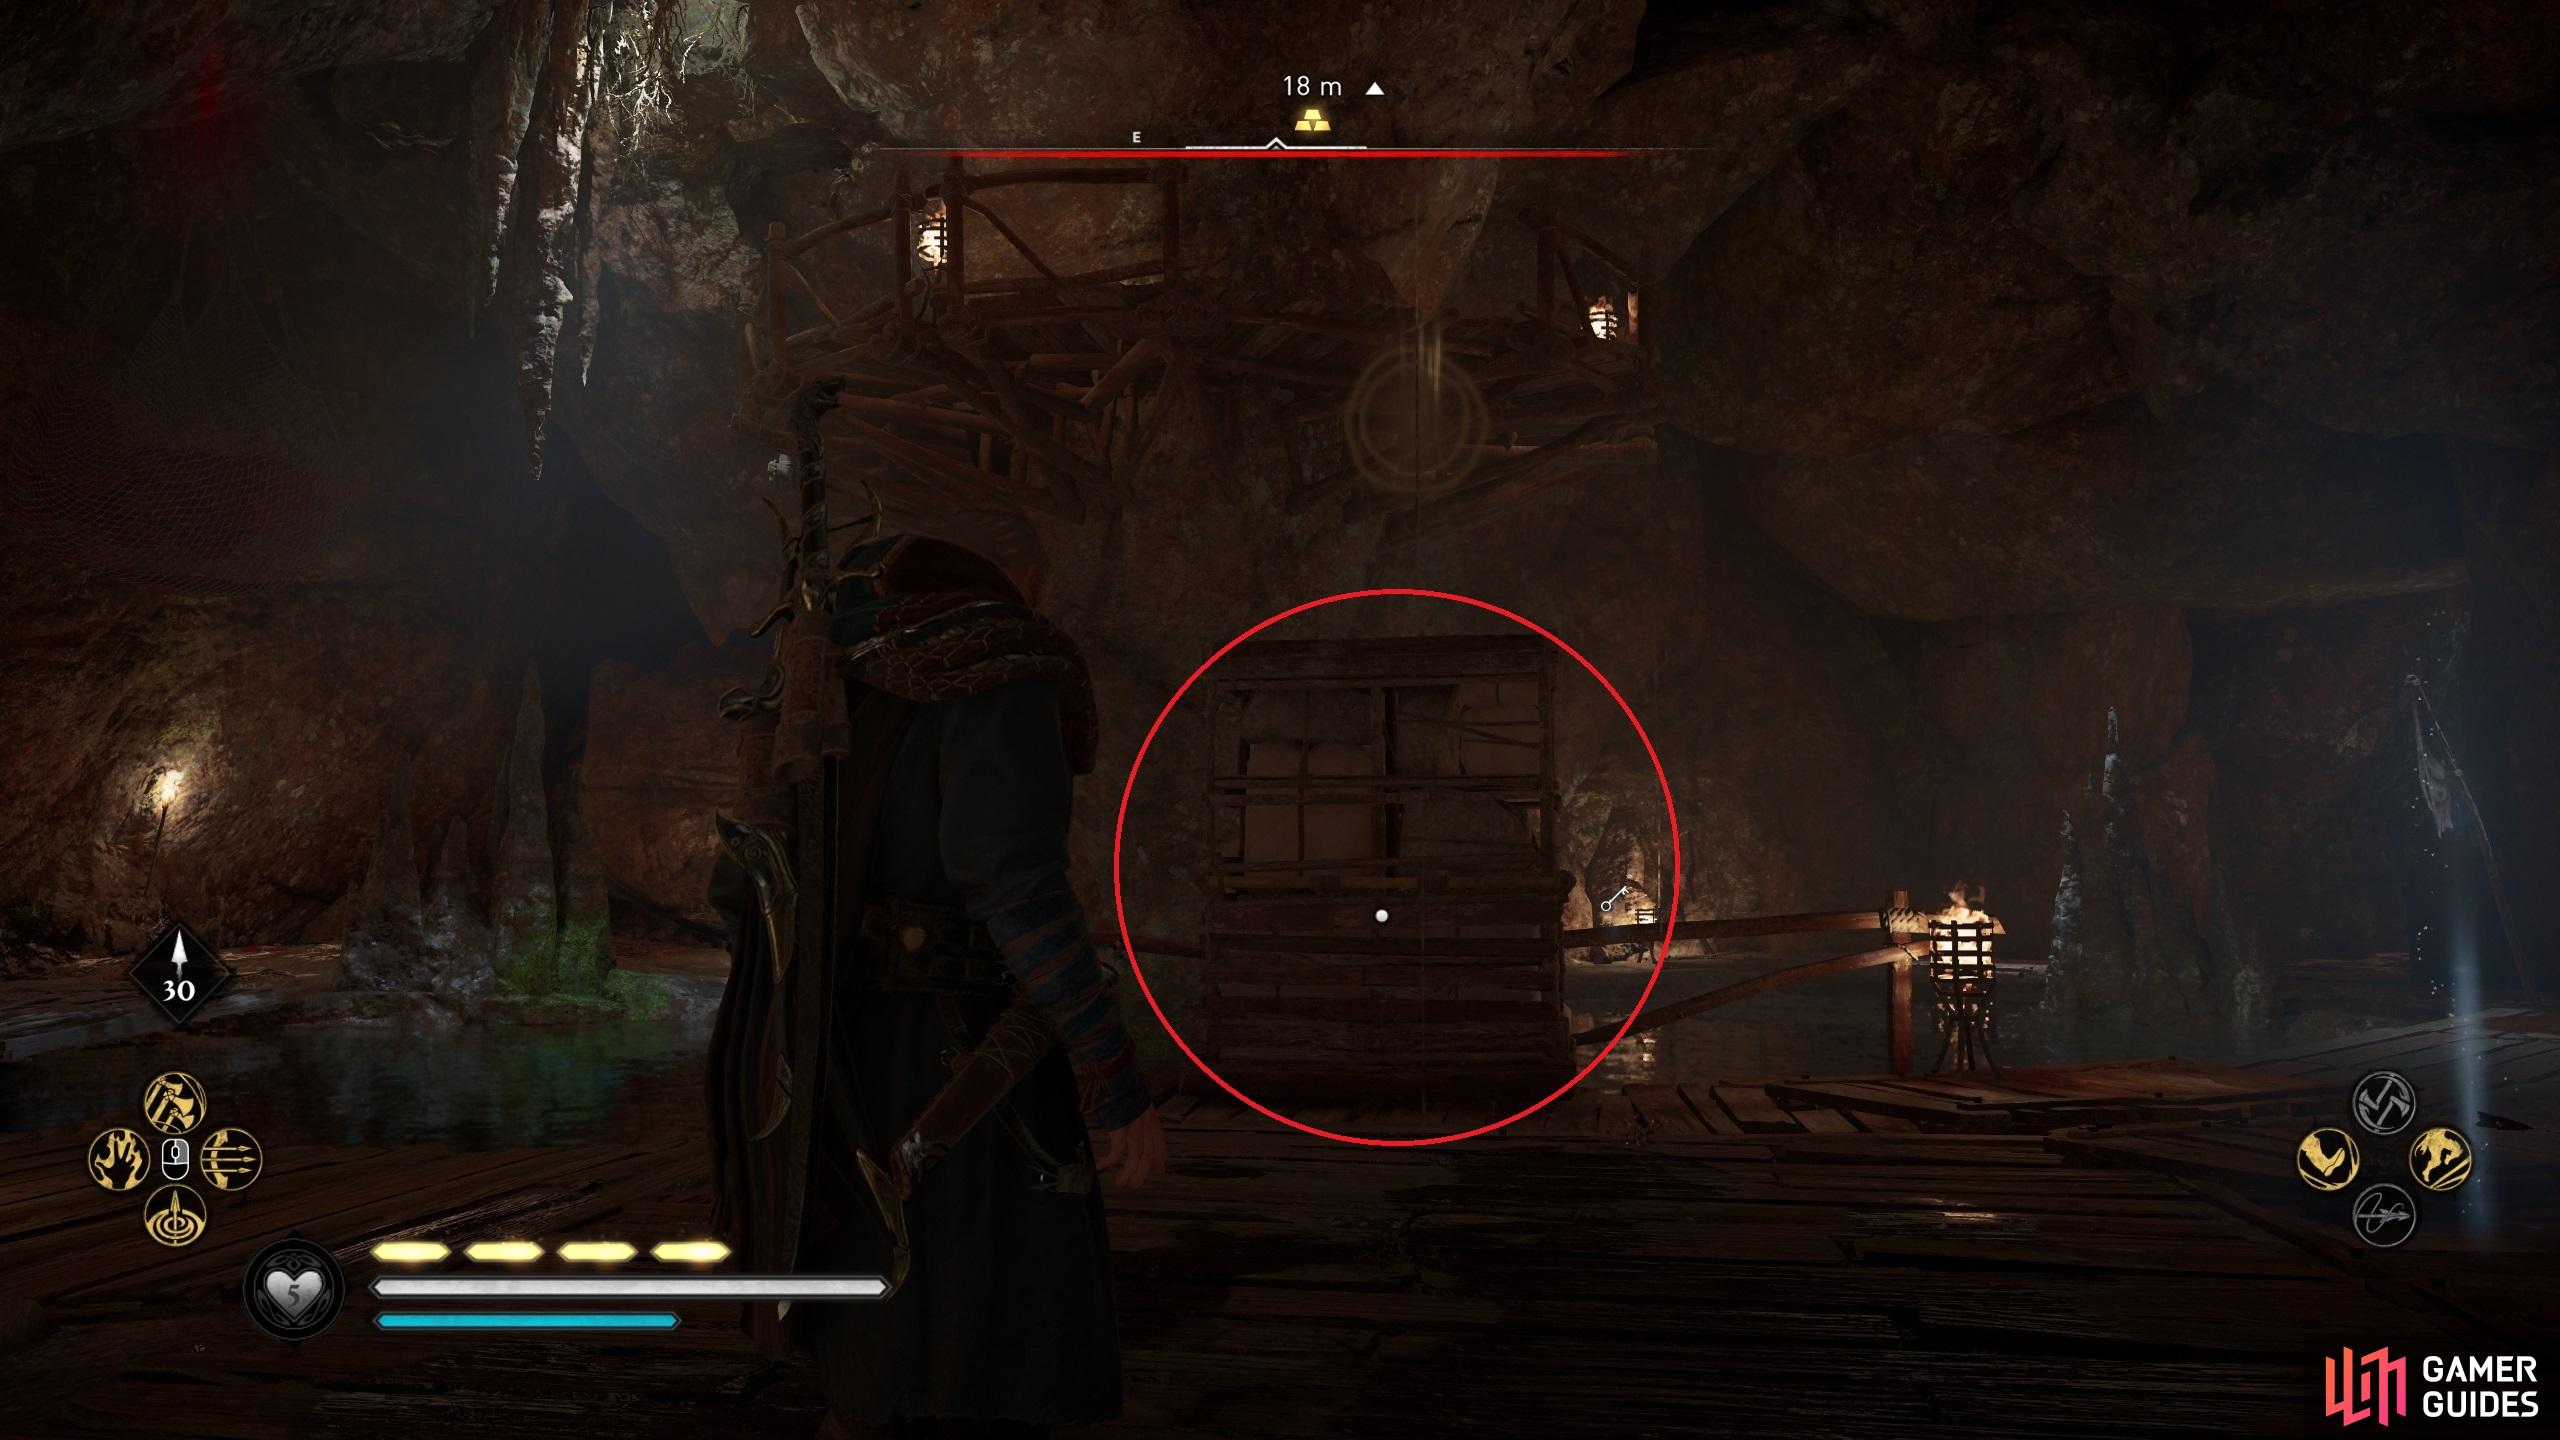 Youll find a movable barricade on the western side of the chamber. Use it to reach the wooden platform.